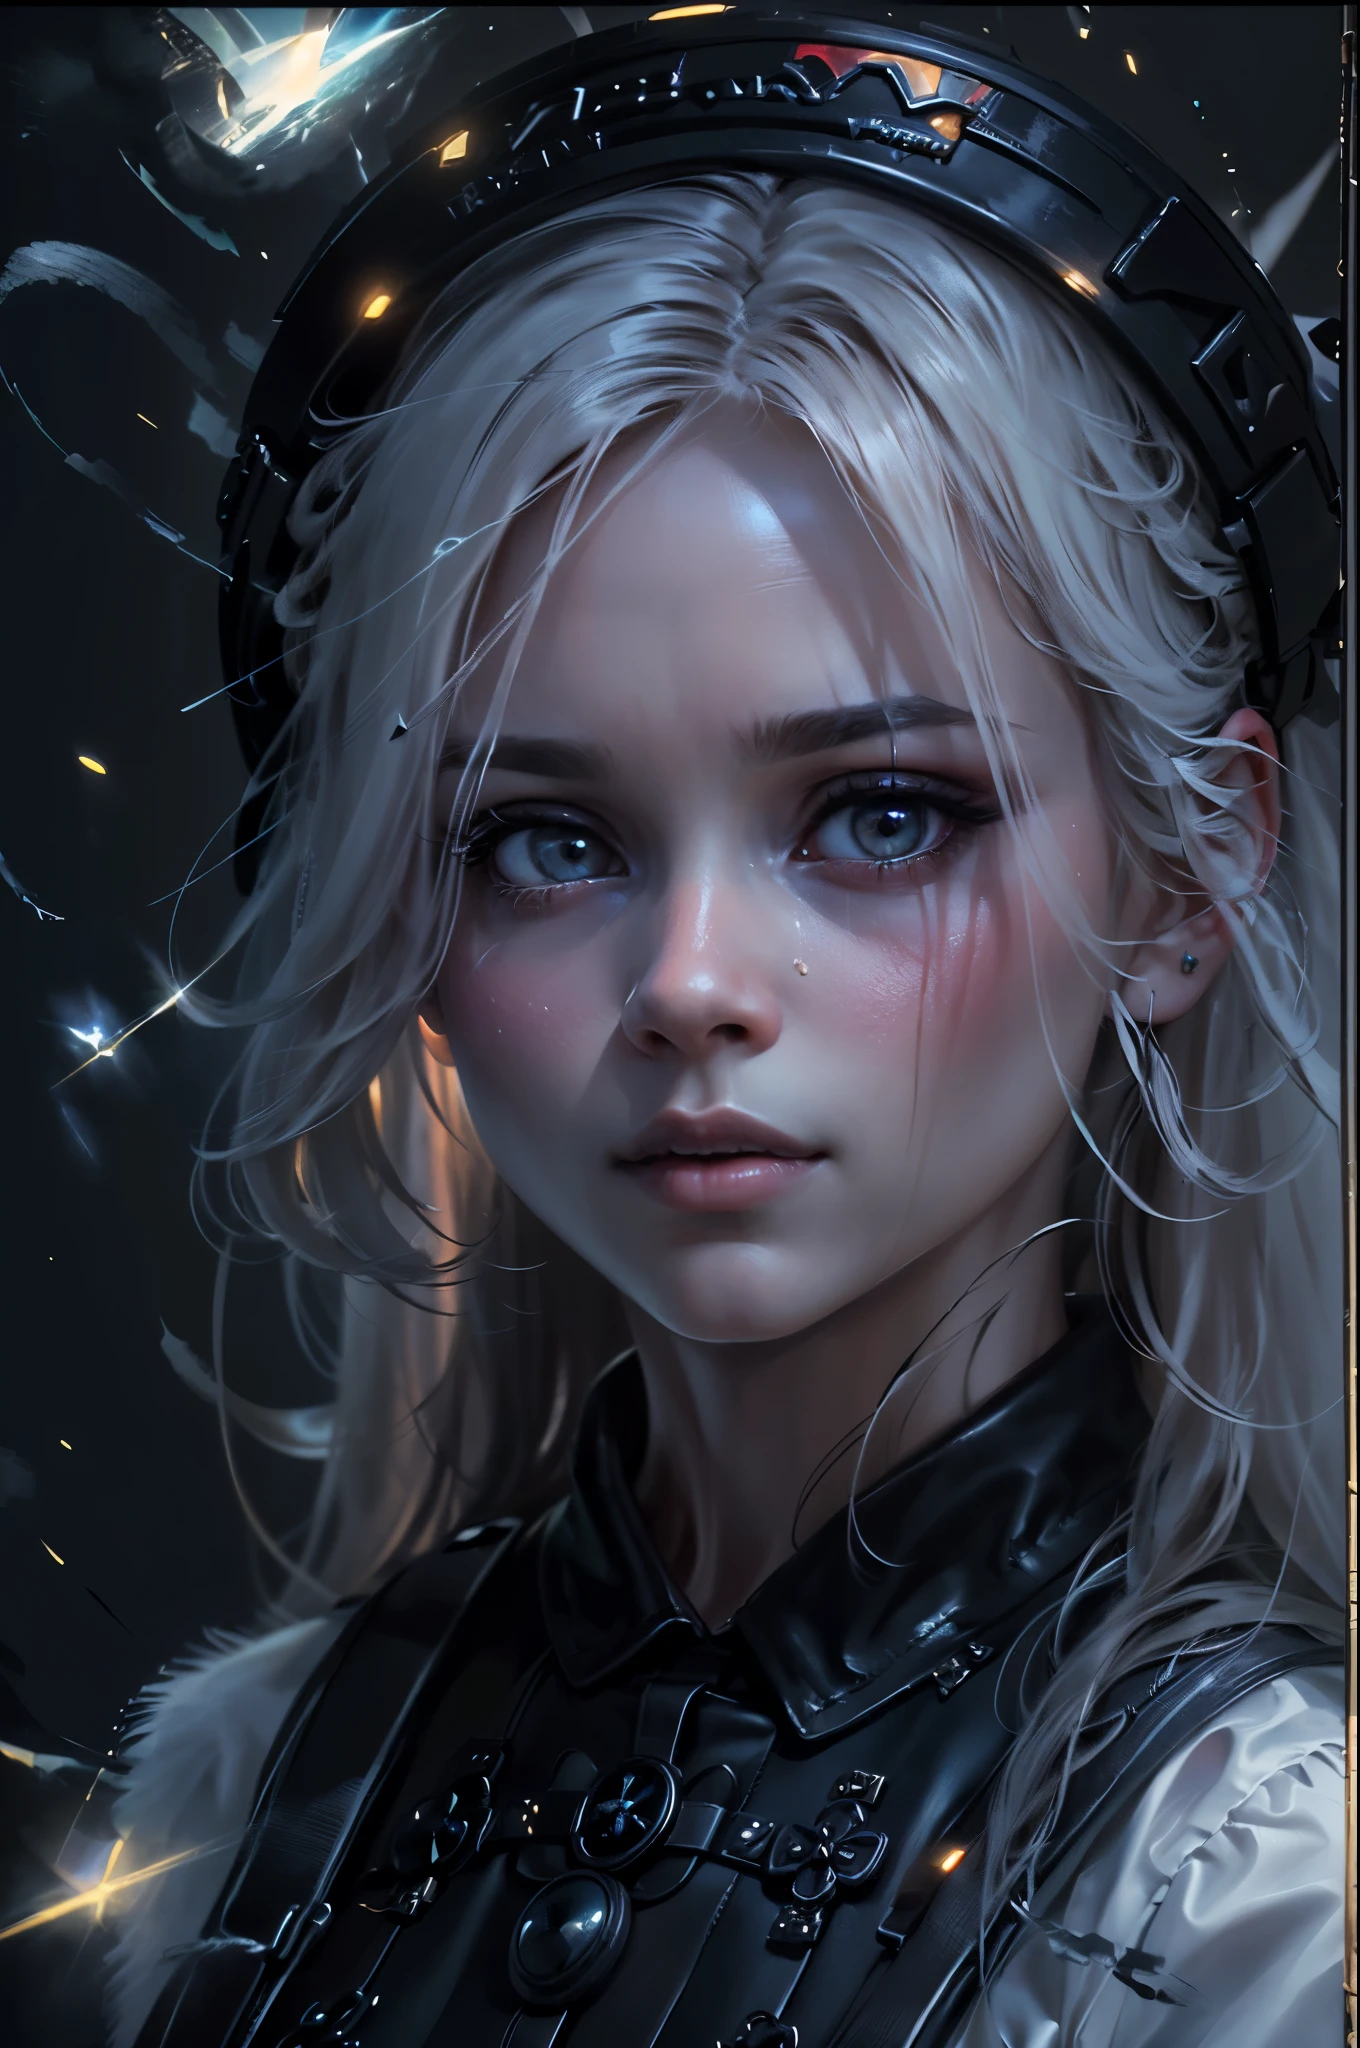 ((space, Distant stars), (Fantastic image, very beautiful - space girl), (1 girl; 1.3), (Face. figure))). ((Graceful forms. Graceful girl). (high quality), (stylization - animation, realism). (Dark cool colors mixed with warm shades). (angel girl), (photorealistic, Cinematic picture), (high detail, complete black hole, 8K. dynamic expressive image)). ((Very detailed eyes and face))), Beautiful detailed eyes. masterpiece, Best quality, full length portrait, amazing beauty, dynamic pose, нежное Face, and bright eyes)). ((She wears transparent, semi-sheer dress, emphasizing a slim figure). (She&#39;s an angel, descended into the underworld. She&#39;s a savior, light in the dark kingdom, radiating a soft glow. High detail, Other worlds, light of distant stars), (detail, high quality), (Muffled light, dark environments - the spooky cinematic setting is great)). ((Girl with white skin, realistic detailed skin, clear focus, volumetric mist near the floor, 8K, UHD, SLR camera, high quality, granularity. photorealism, lomography, fantastic dark art, Utopian reality)). ((готическое Face, gothic horror atmosphere, зловещая gothic aesthetics), (gothic art style, creepy gothic portrait, dark fantasy, mixed with realism, gothic aesthetics)).((Realistic black leather)).